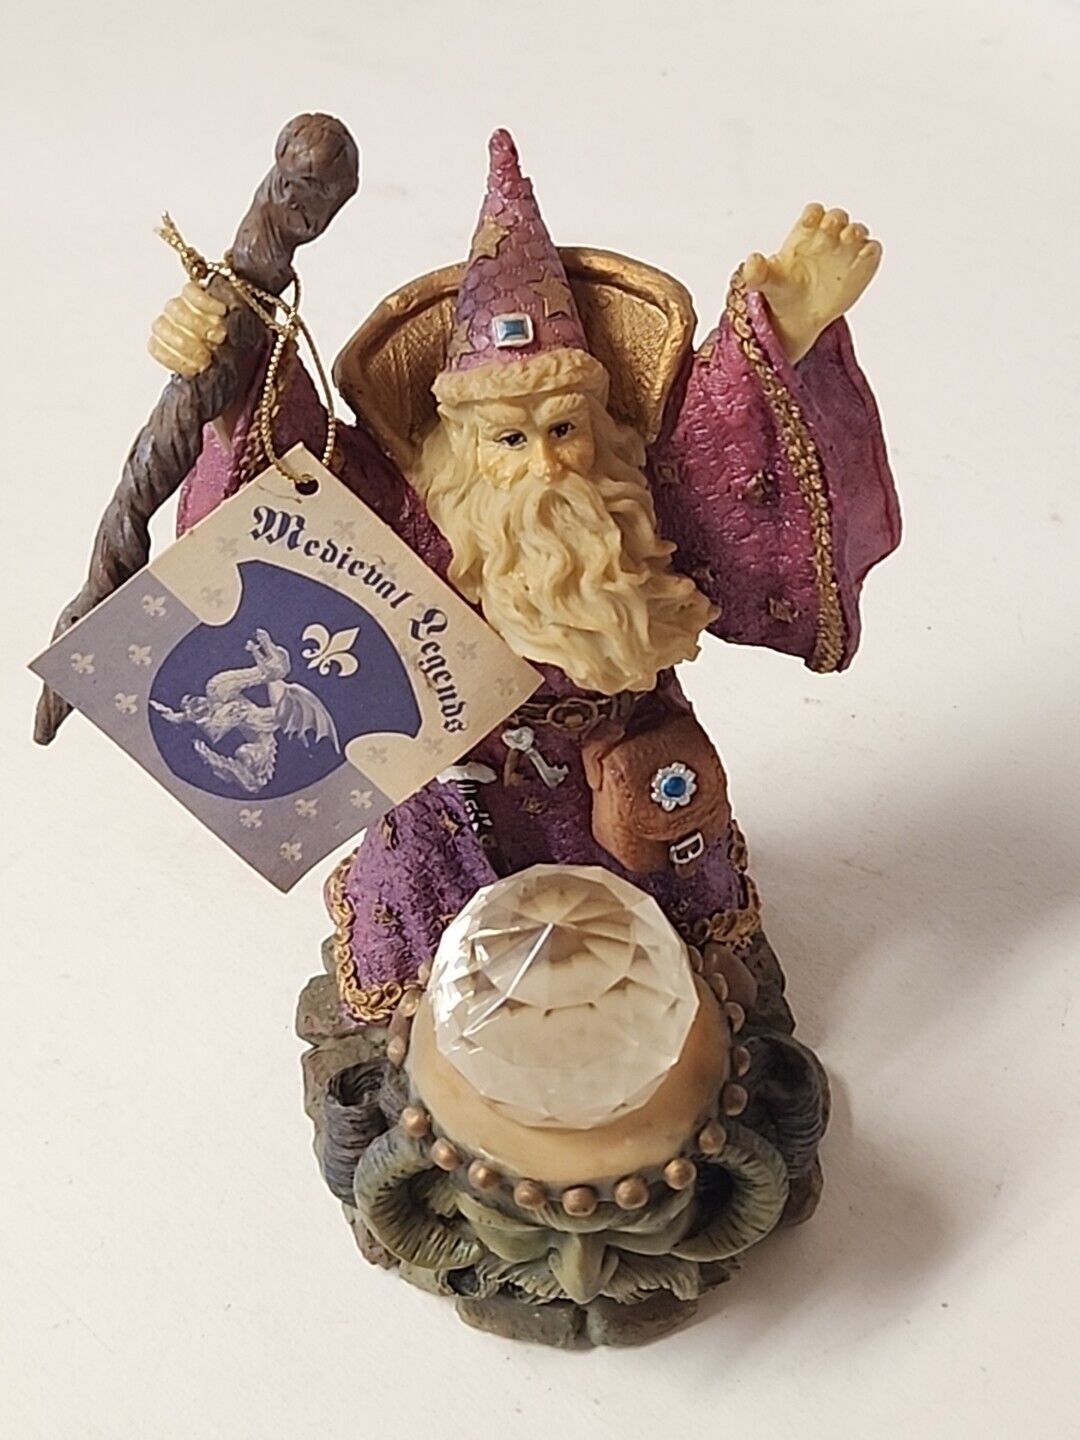 Medieval Legends Merlin/Crystal Ball Figurine With Tag